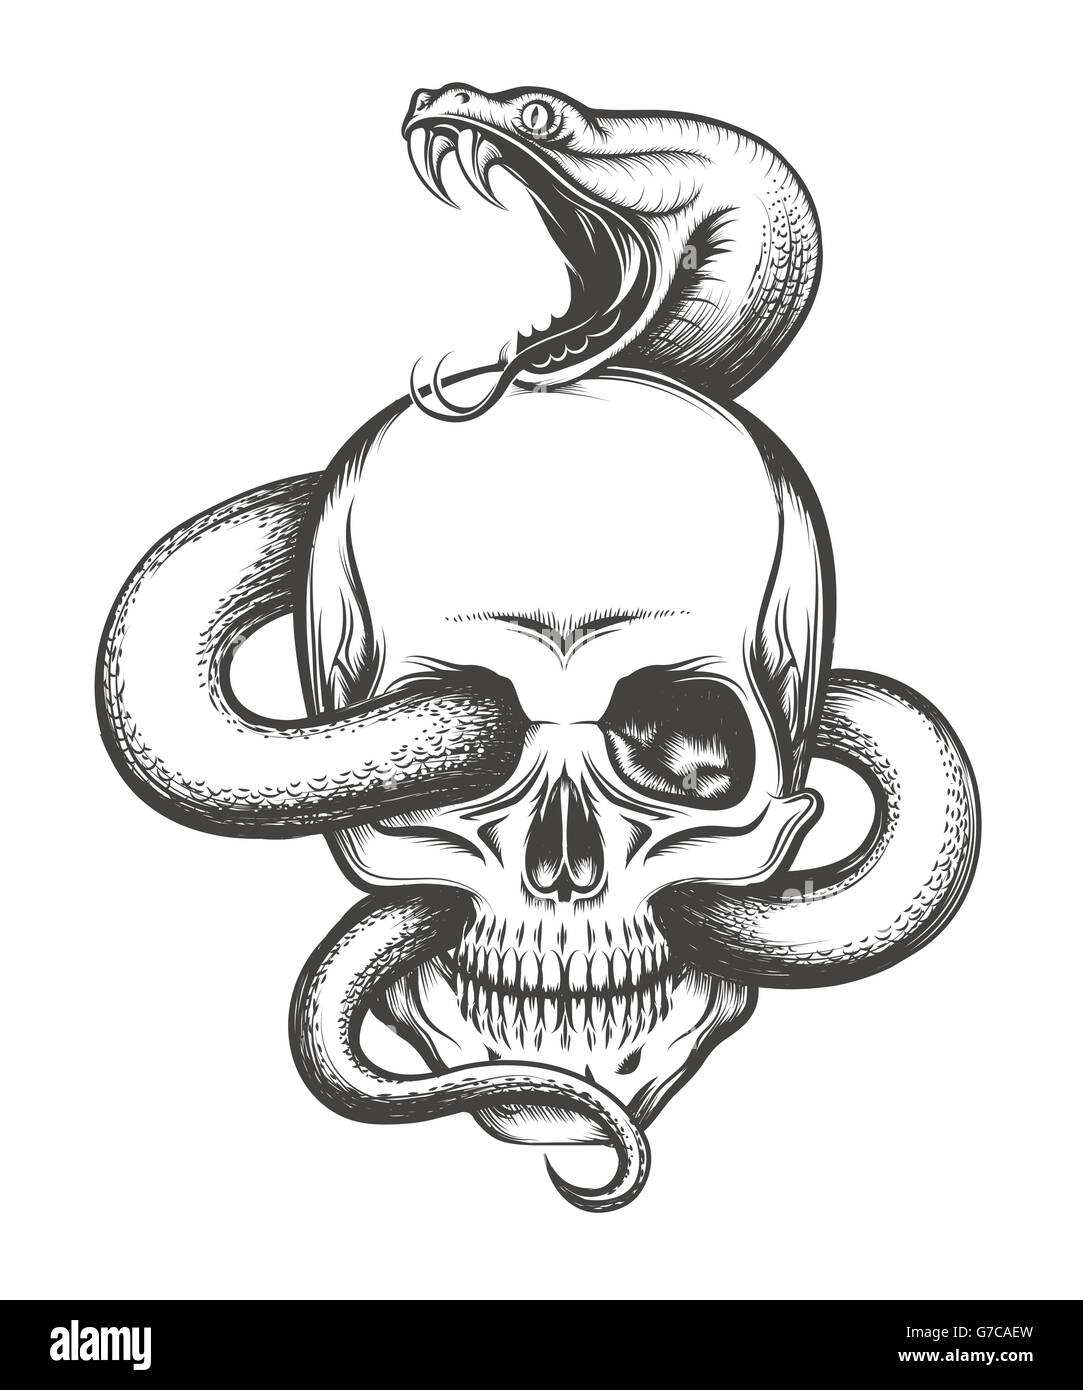 Human skull with crawling snake. Illustration in engraving style. Stock Vector